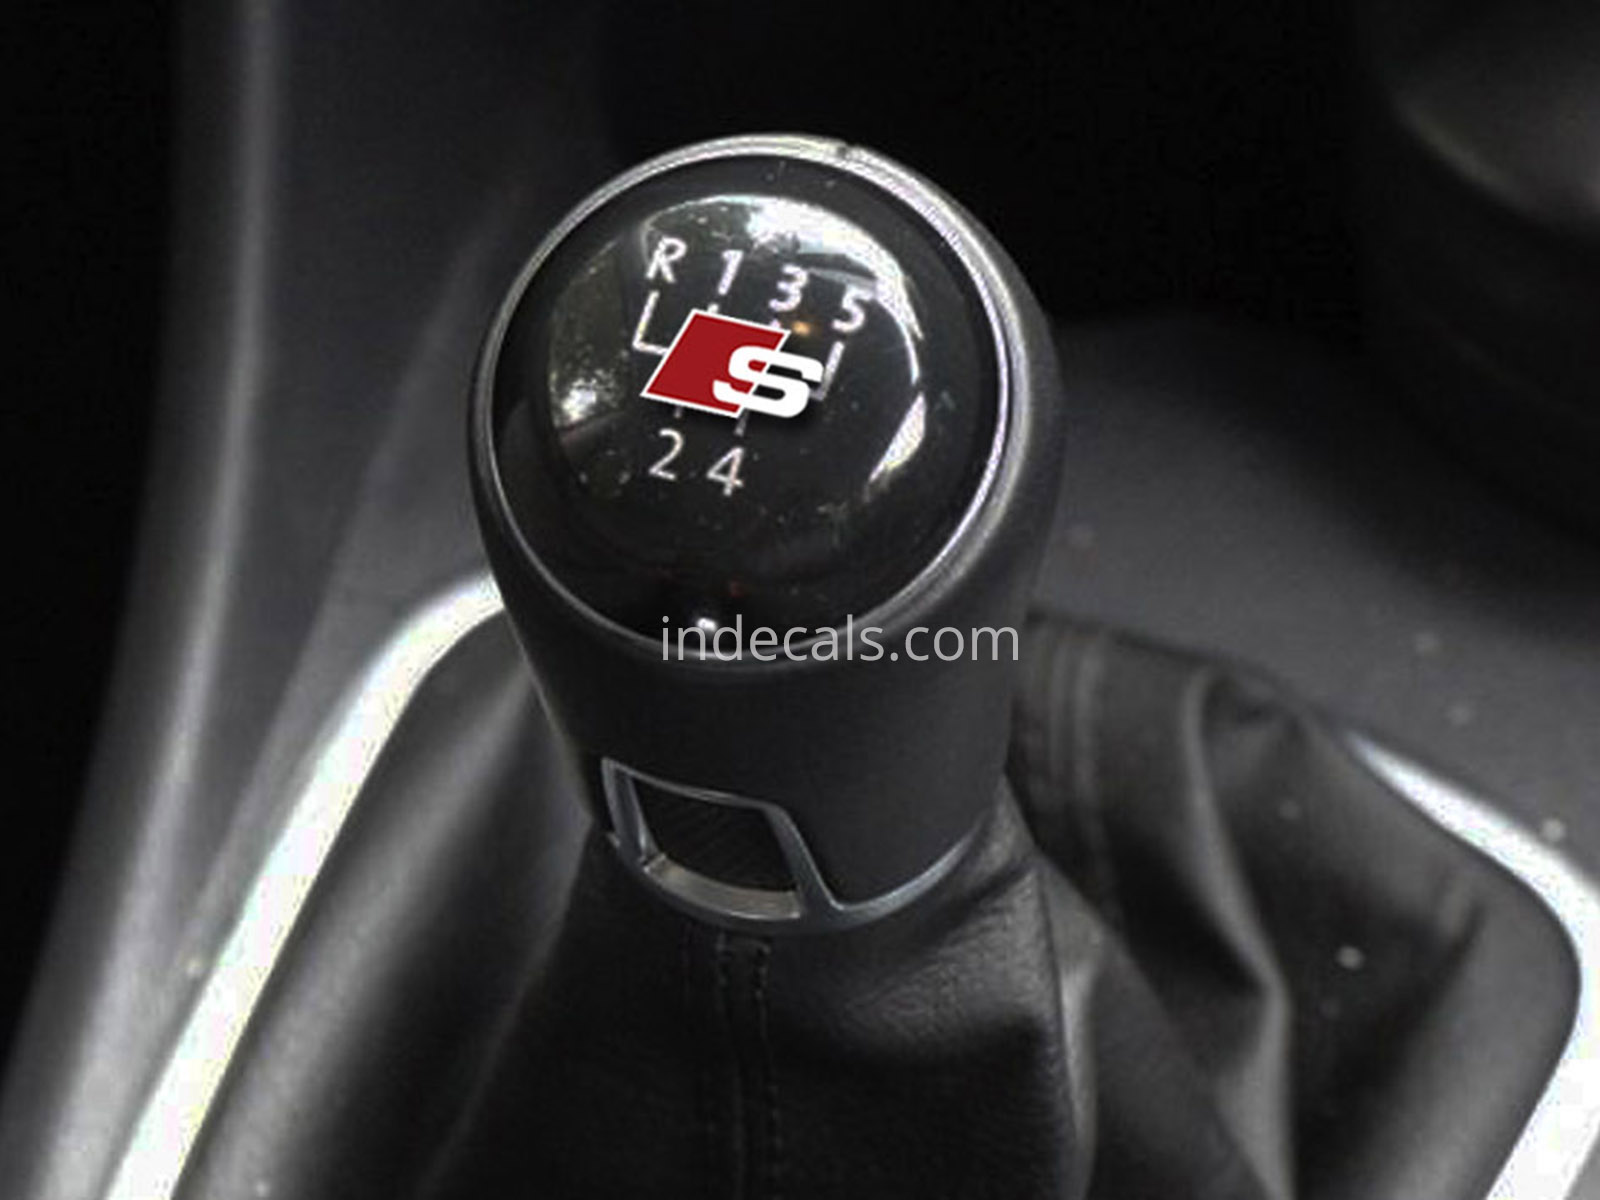 2 x Audi S-Line Stickers for Gear Knob - White + Red